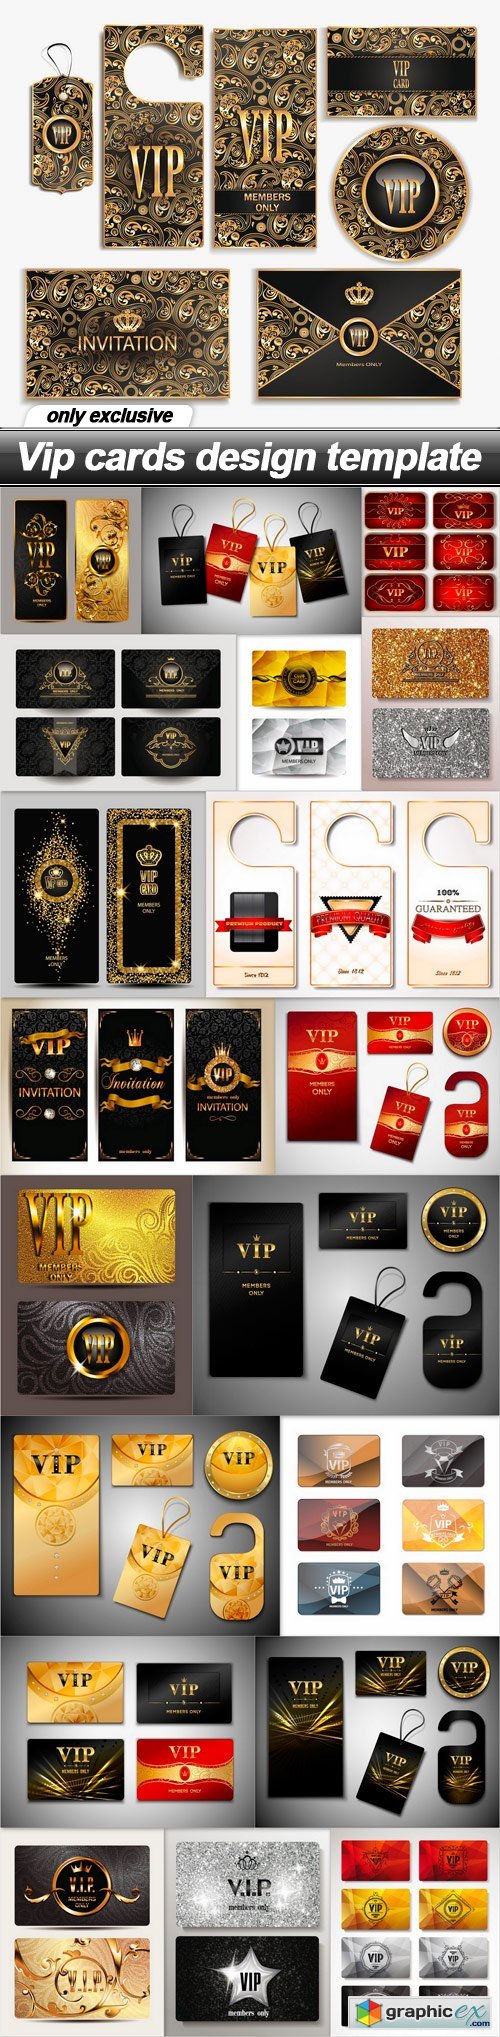 Vip cards design template - 20 EPS